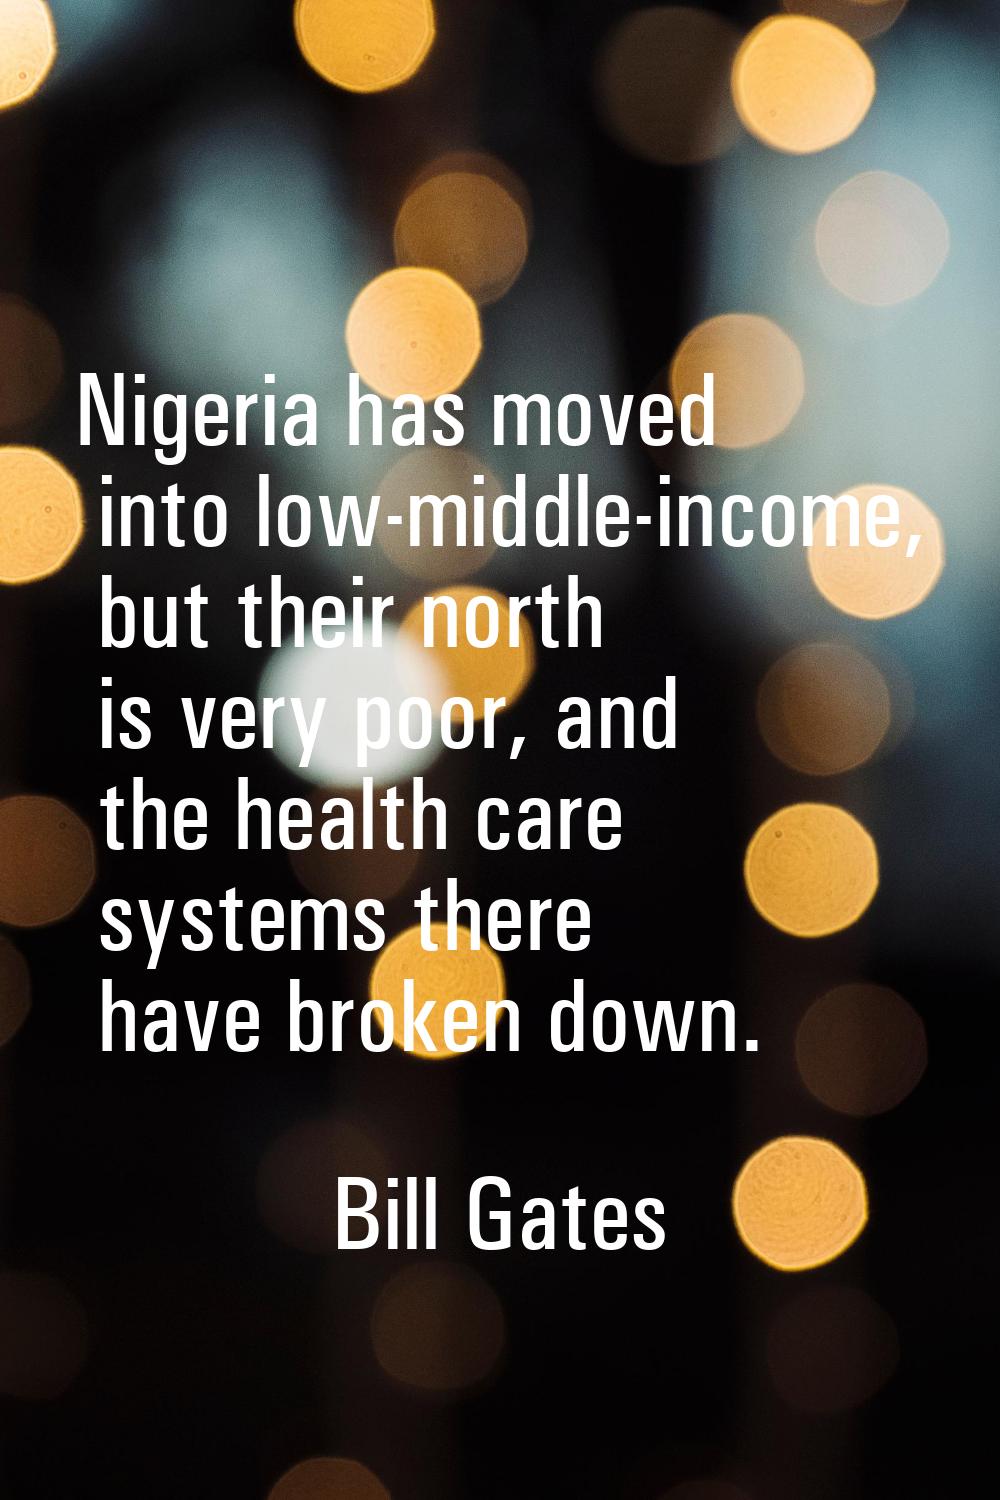 Nigeria has moved into low-middle-income, but their north is very poor, and the health care systems